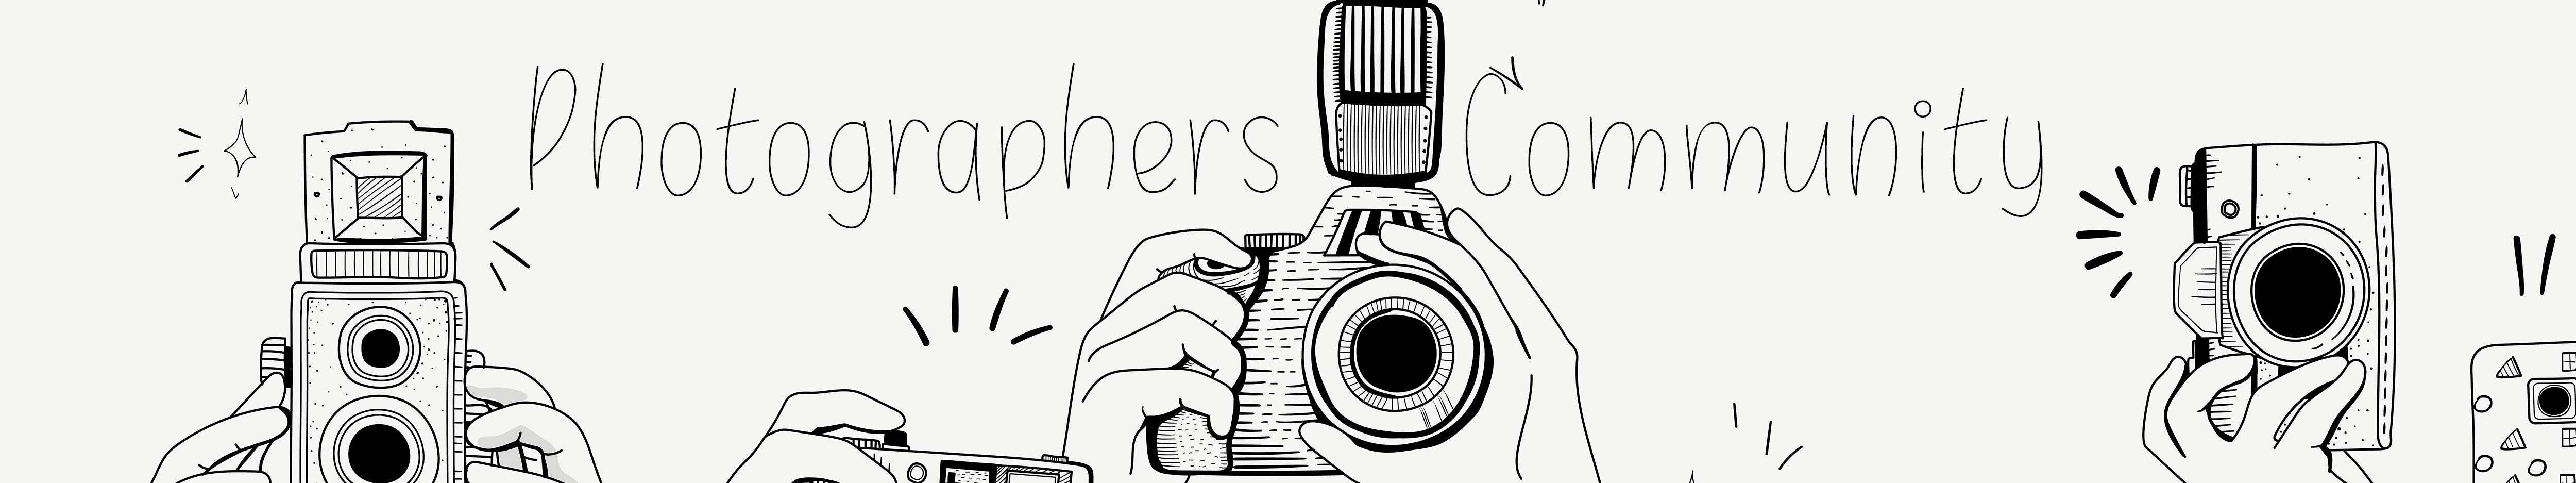 Photographers's cover